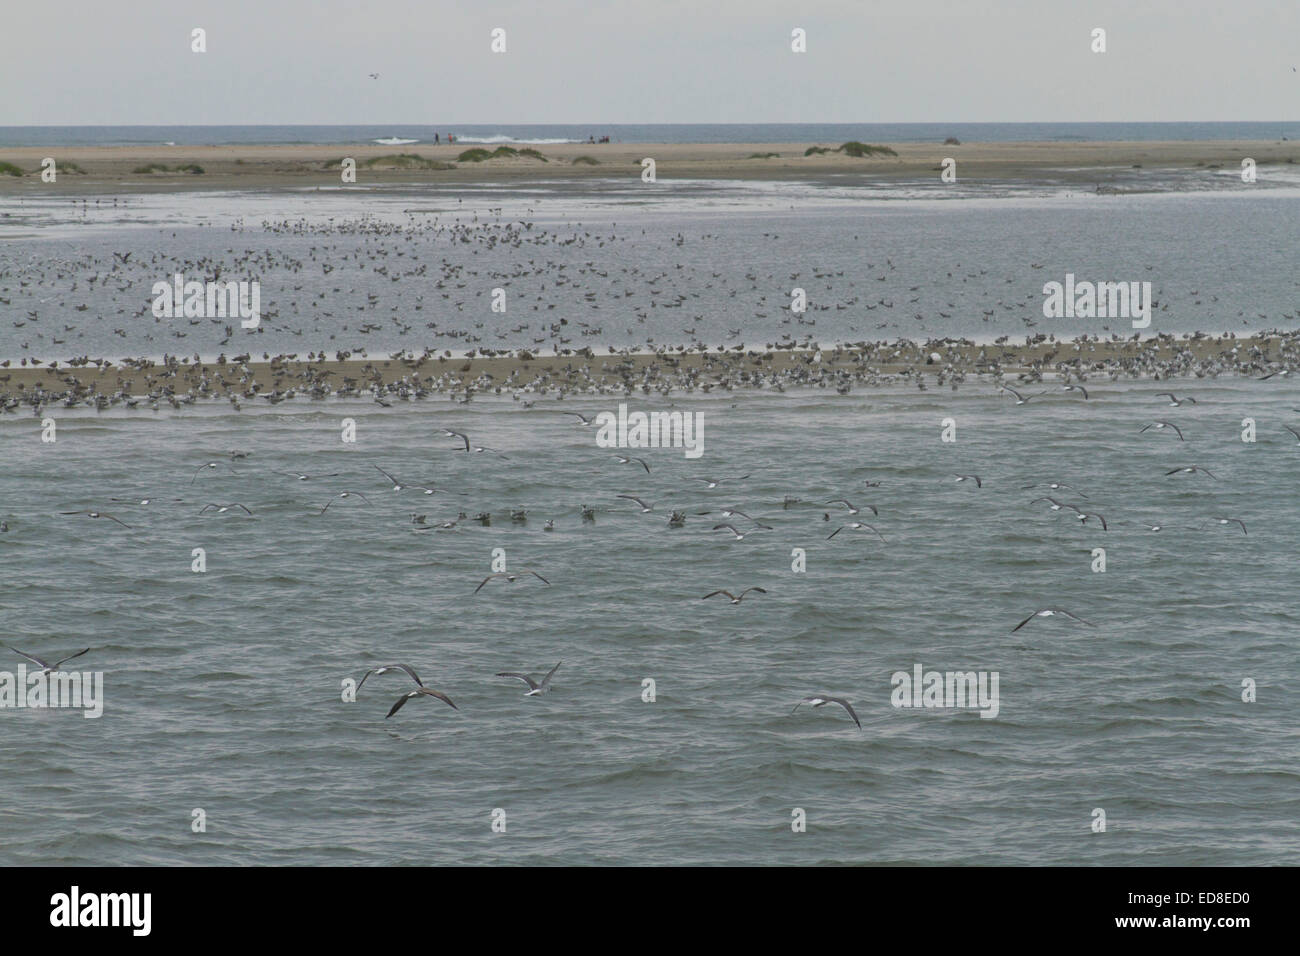 Wild birds congregate on a sand bar habitat in Pamlico Sound in the Outer Banks of North Carolina, USA Stock Photo